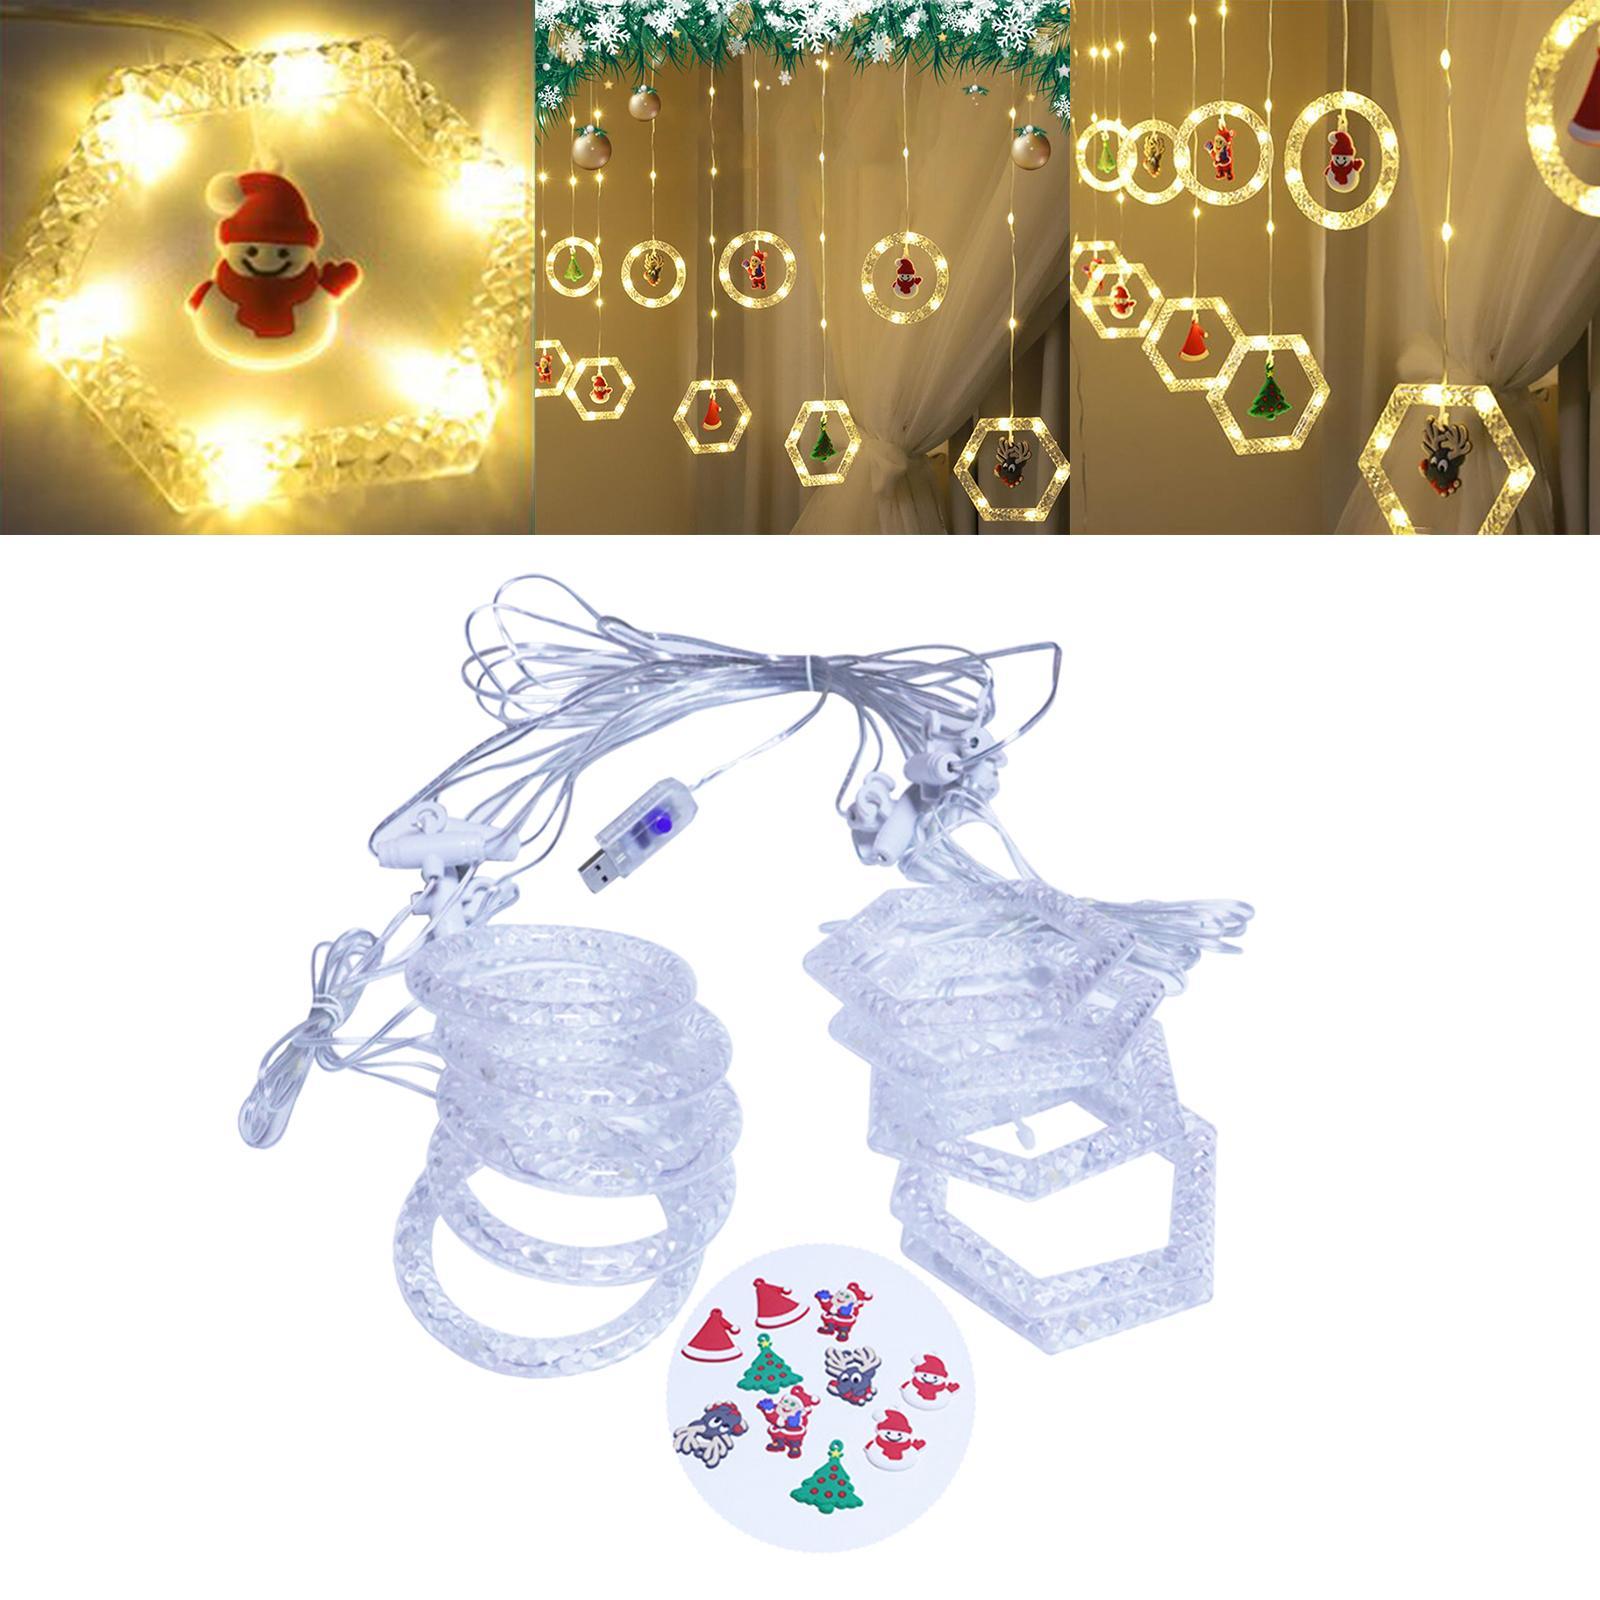 Multipurpose Curtain Lights Hanging for Shopping Mall Themed Party Outdoor